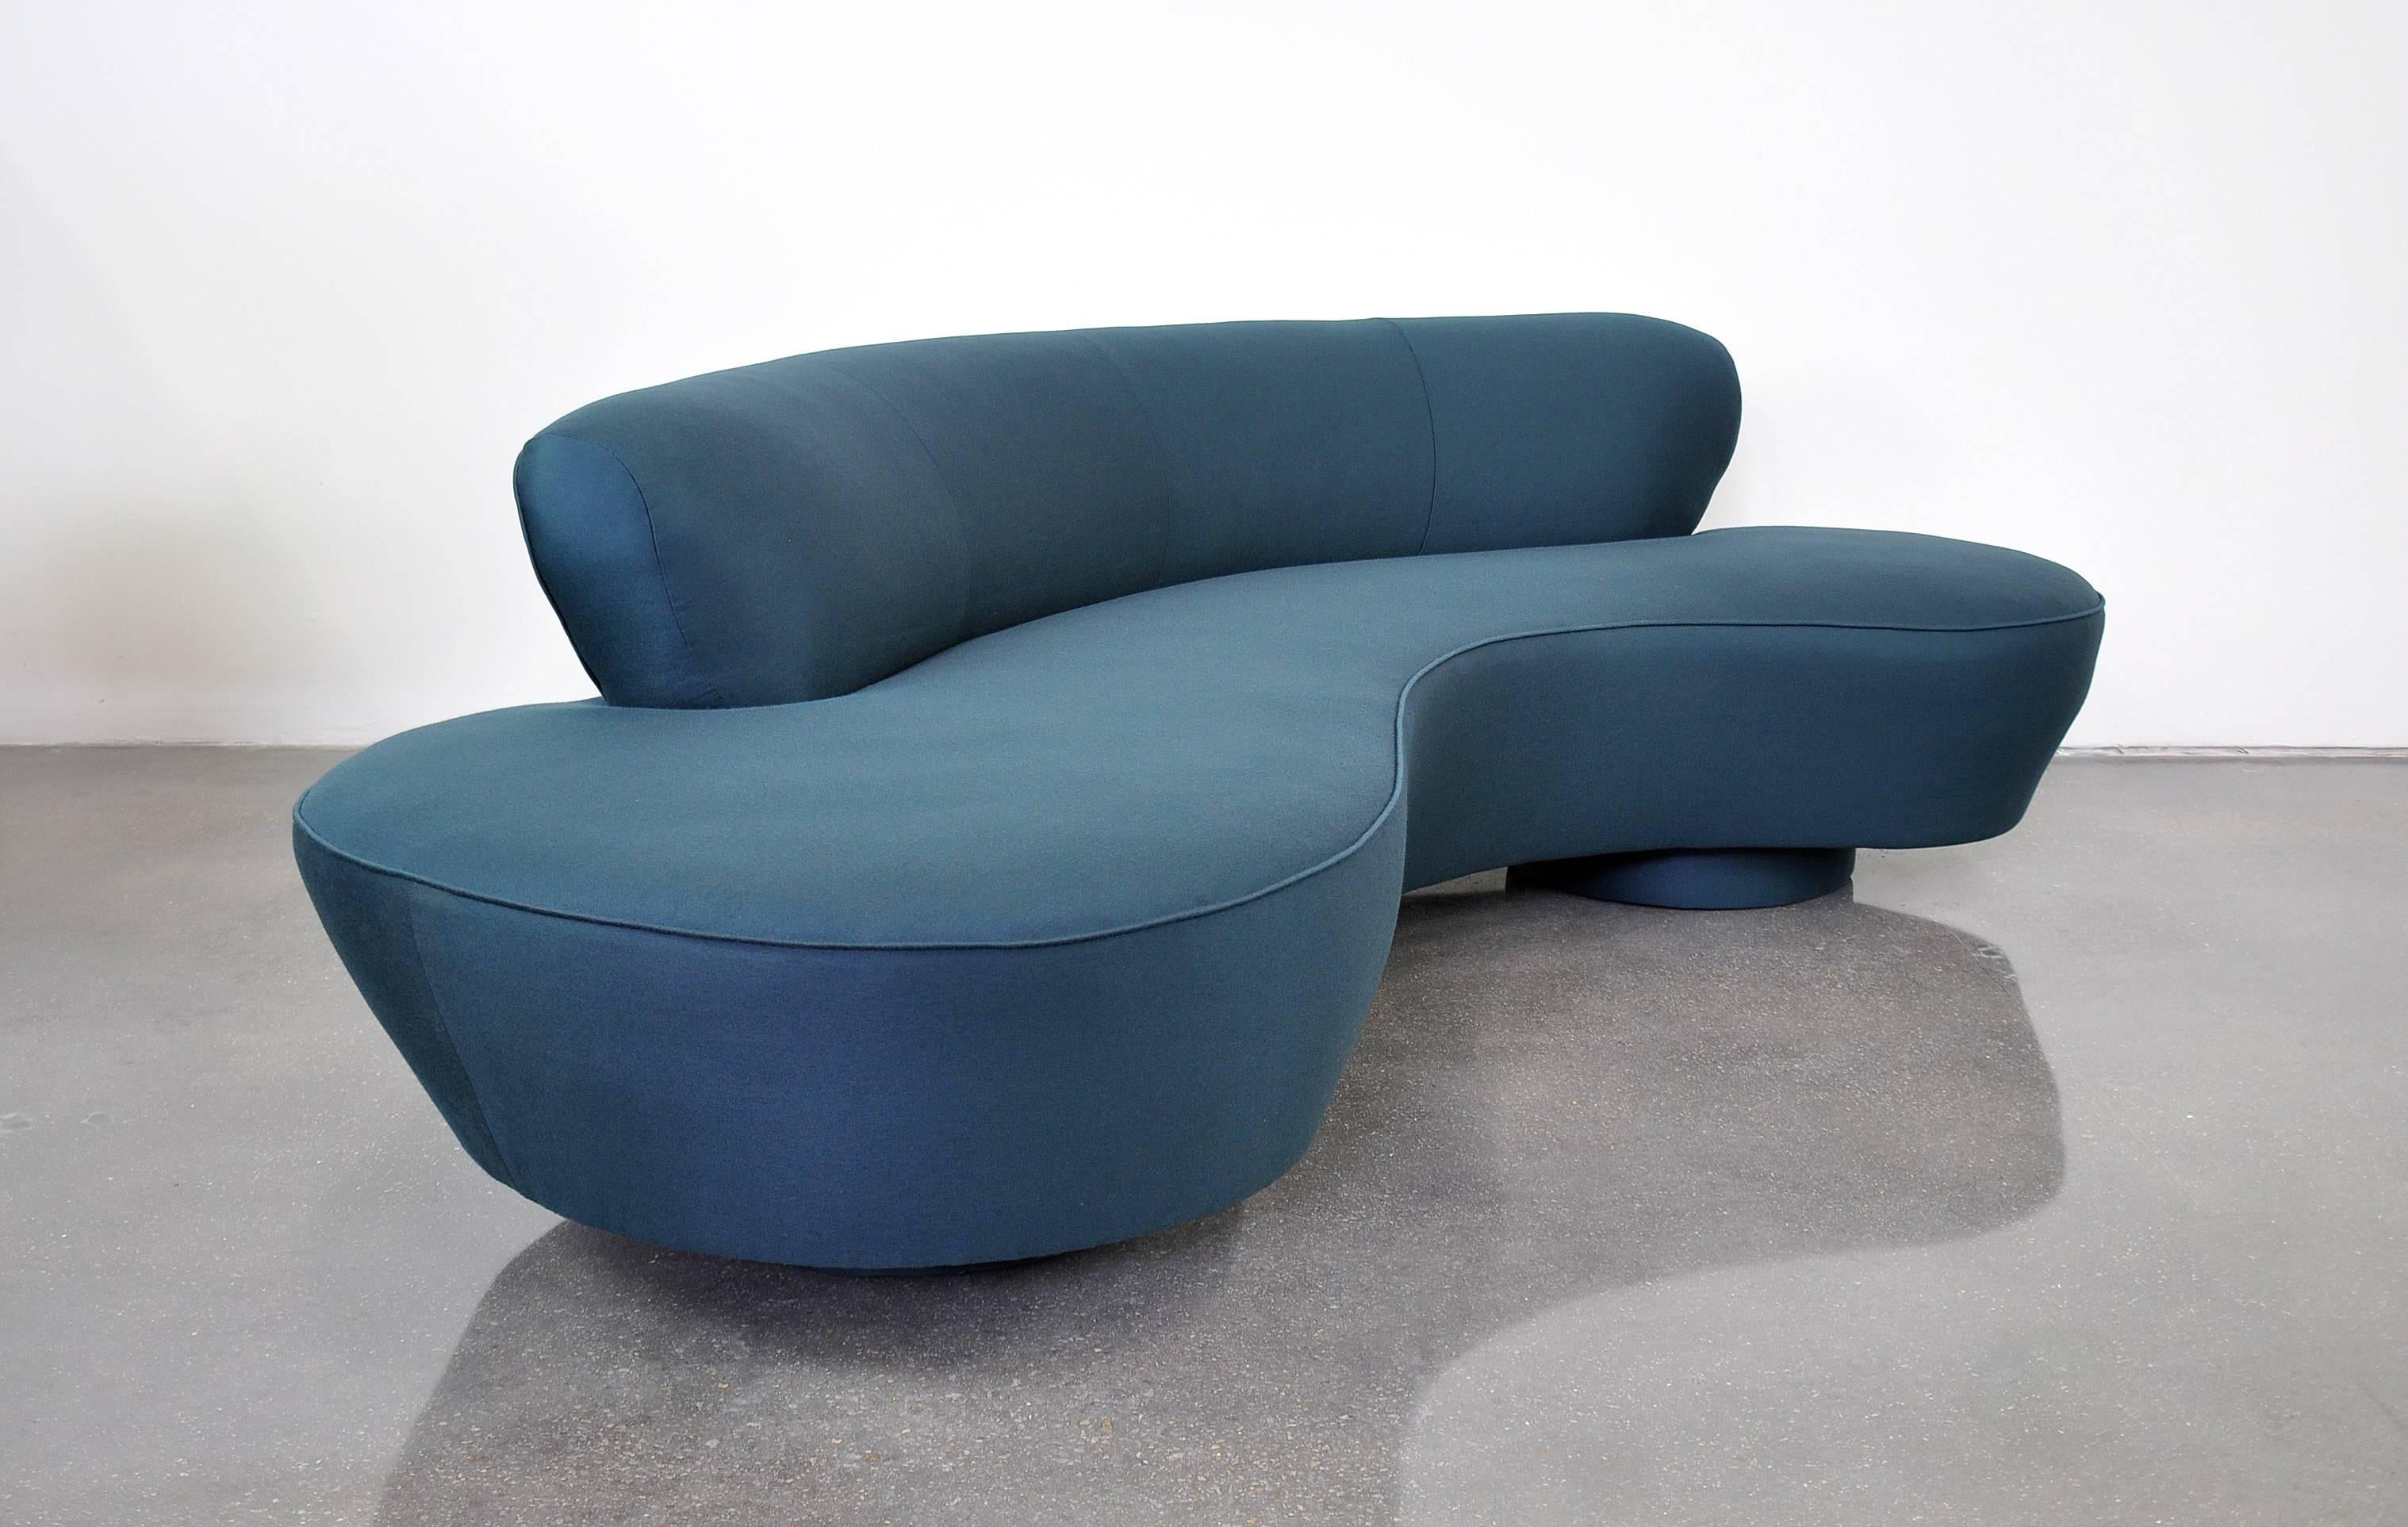 Iconic Mid-Century Modern biomorphic sofa by design legend Vladimir Kagan for Directional reupholstered in an amazing deep blue Maharam fabric. Features a kidney or cloud shape with round upholstered bases and Lucite fin. The dark blue wool fabric